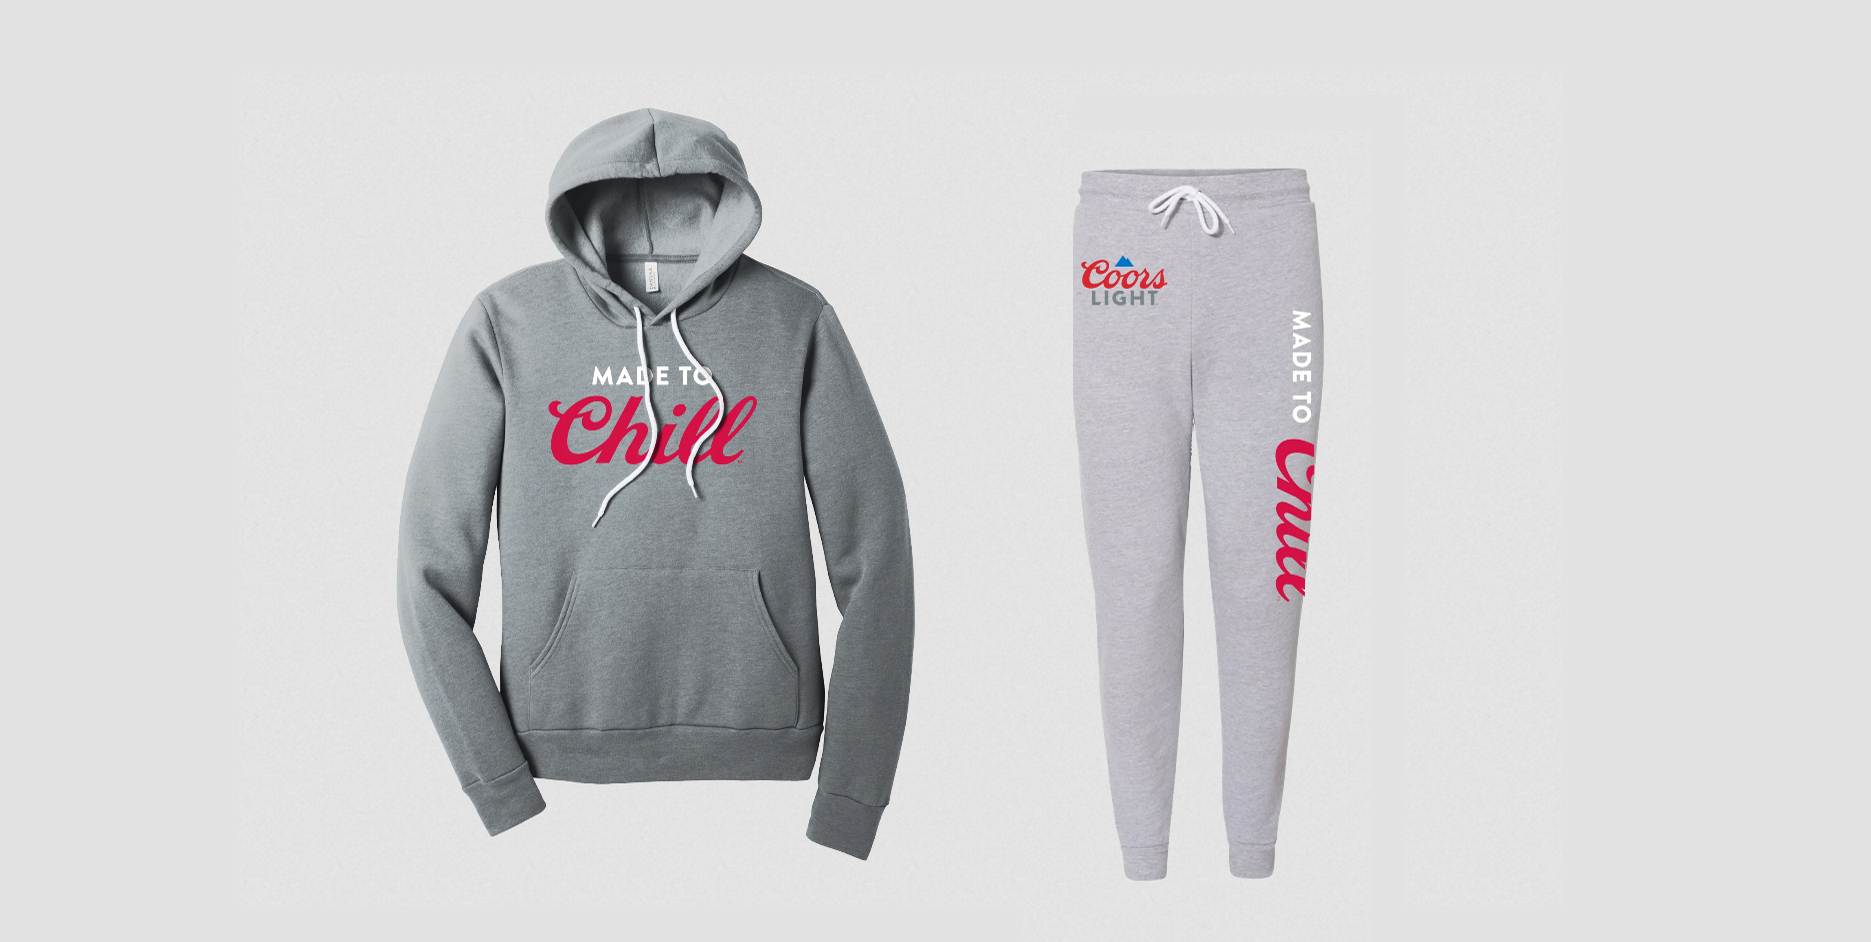 Coors Light chill clothes